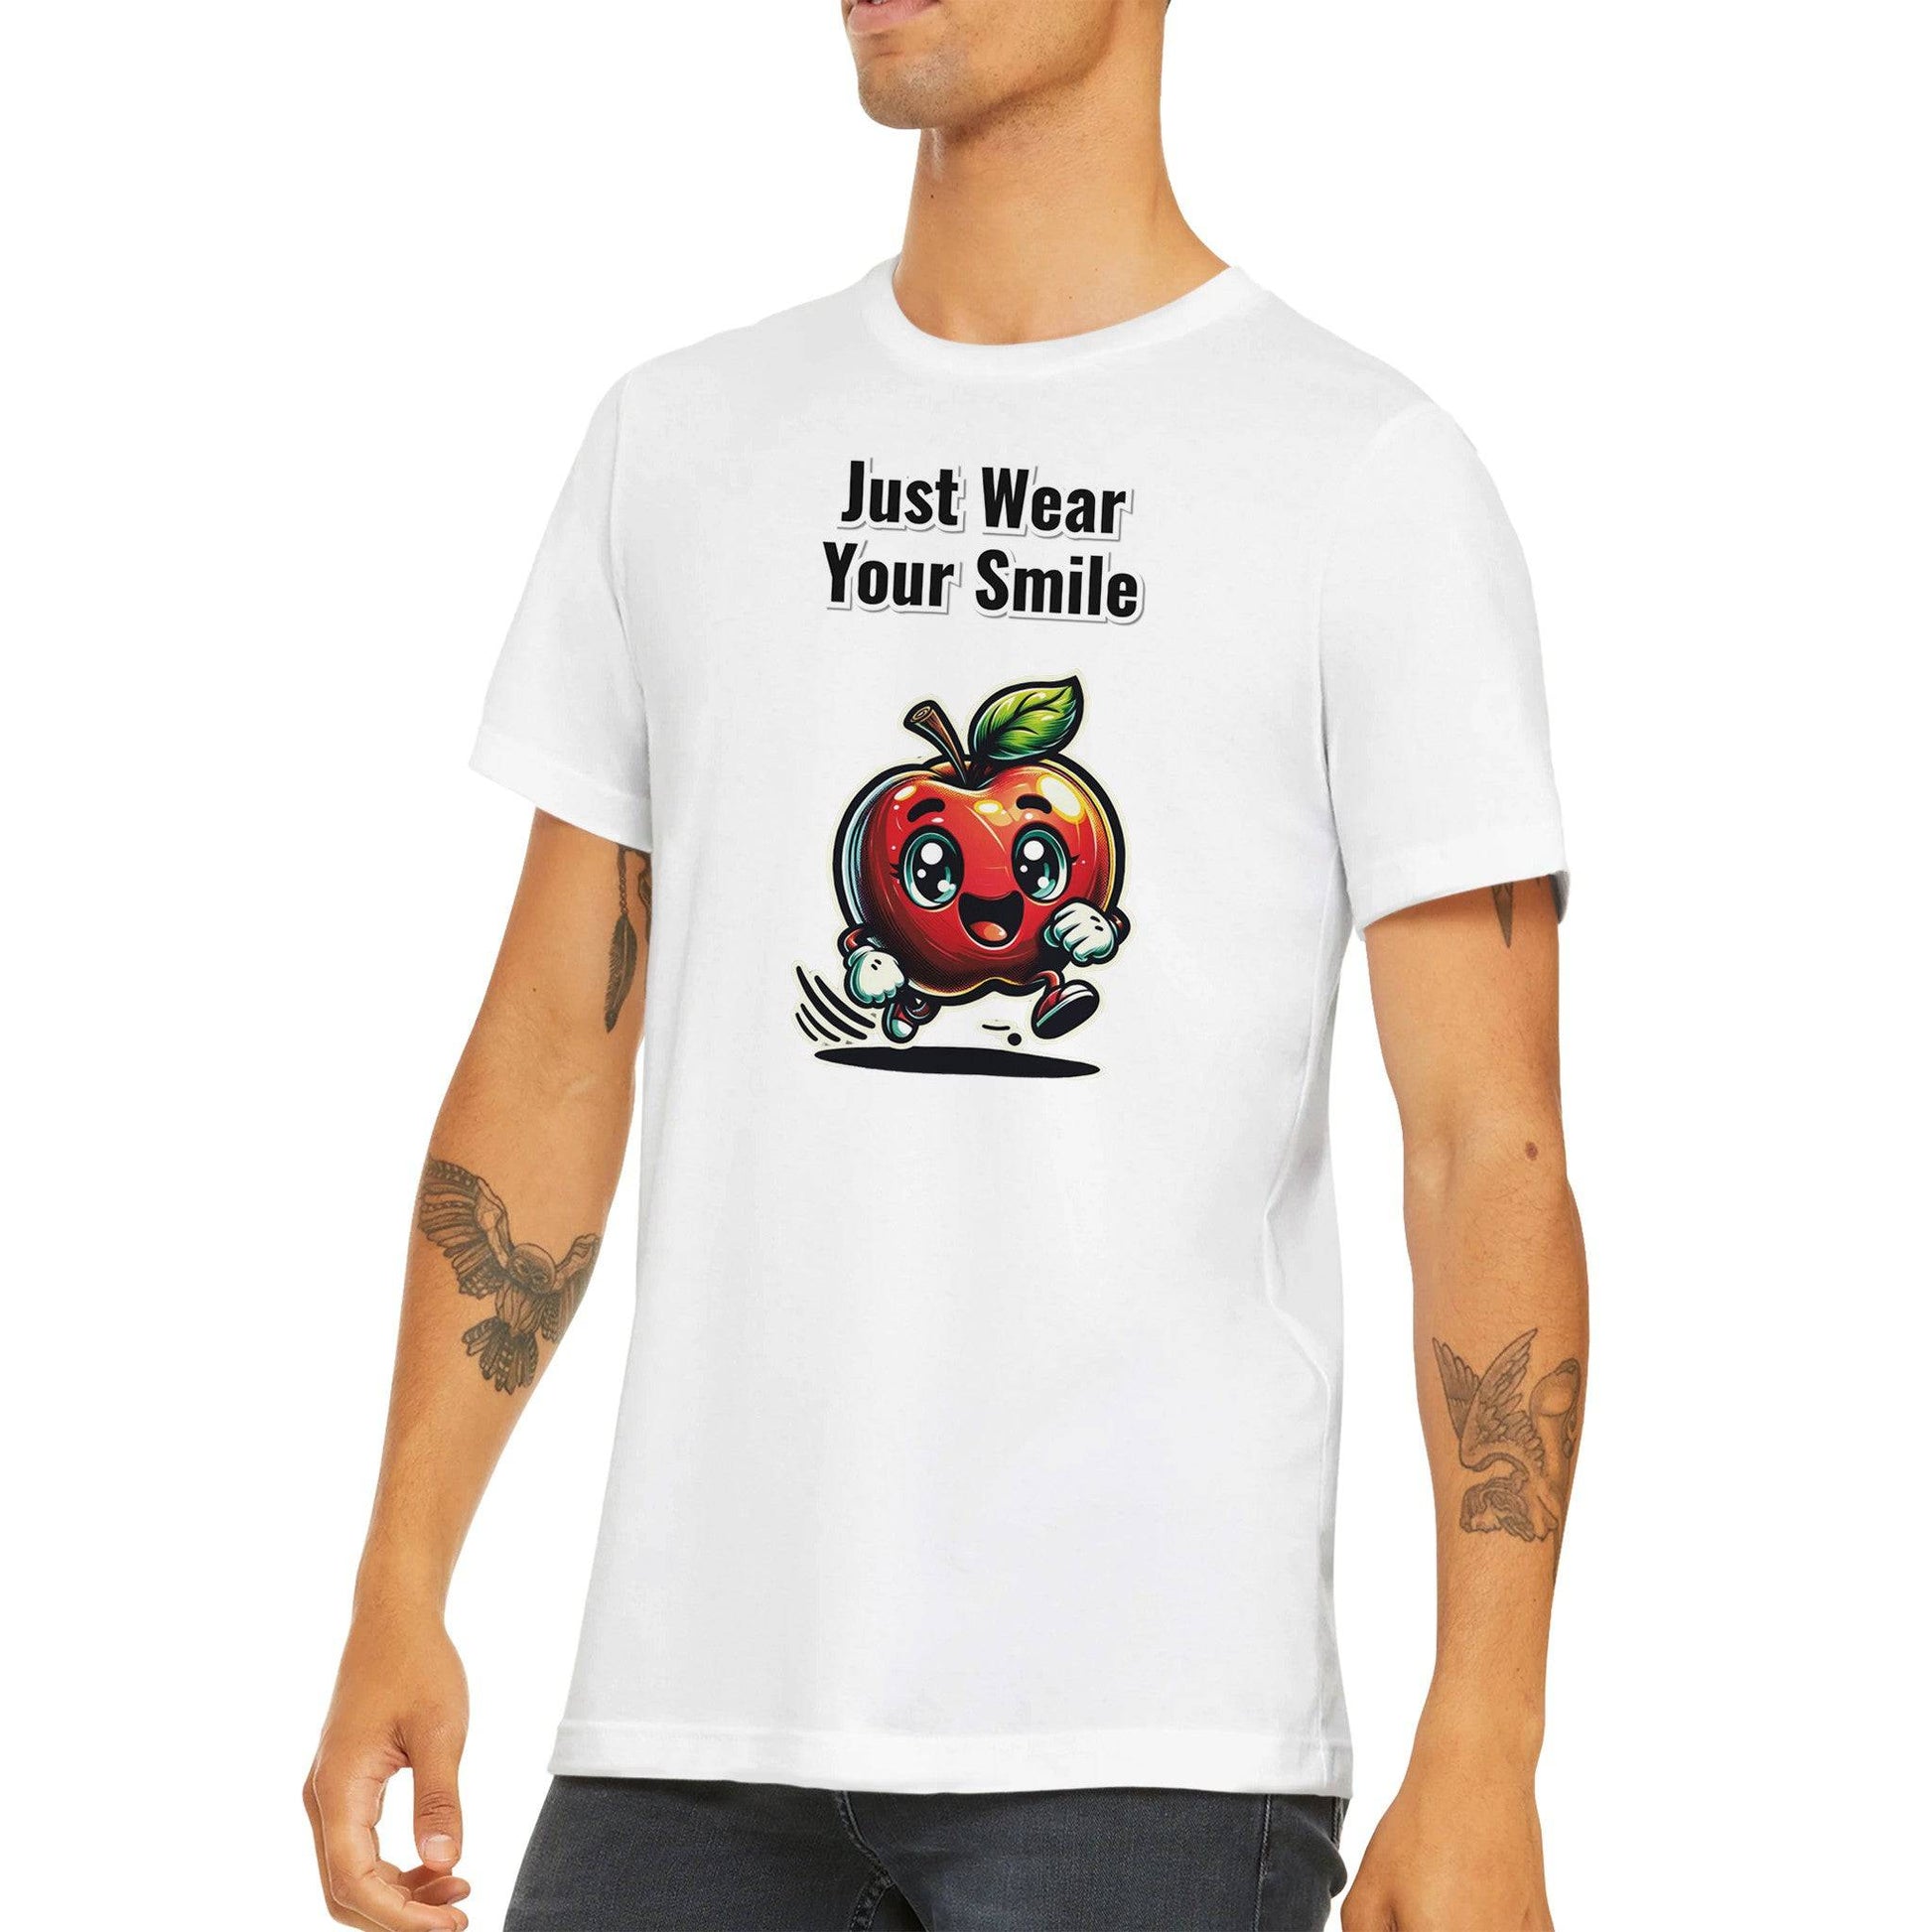 just Wear your smile T-shirt - 100% soft, breathable cotton - BeinCart